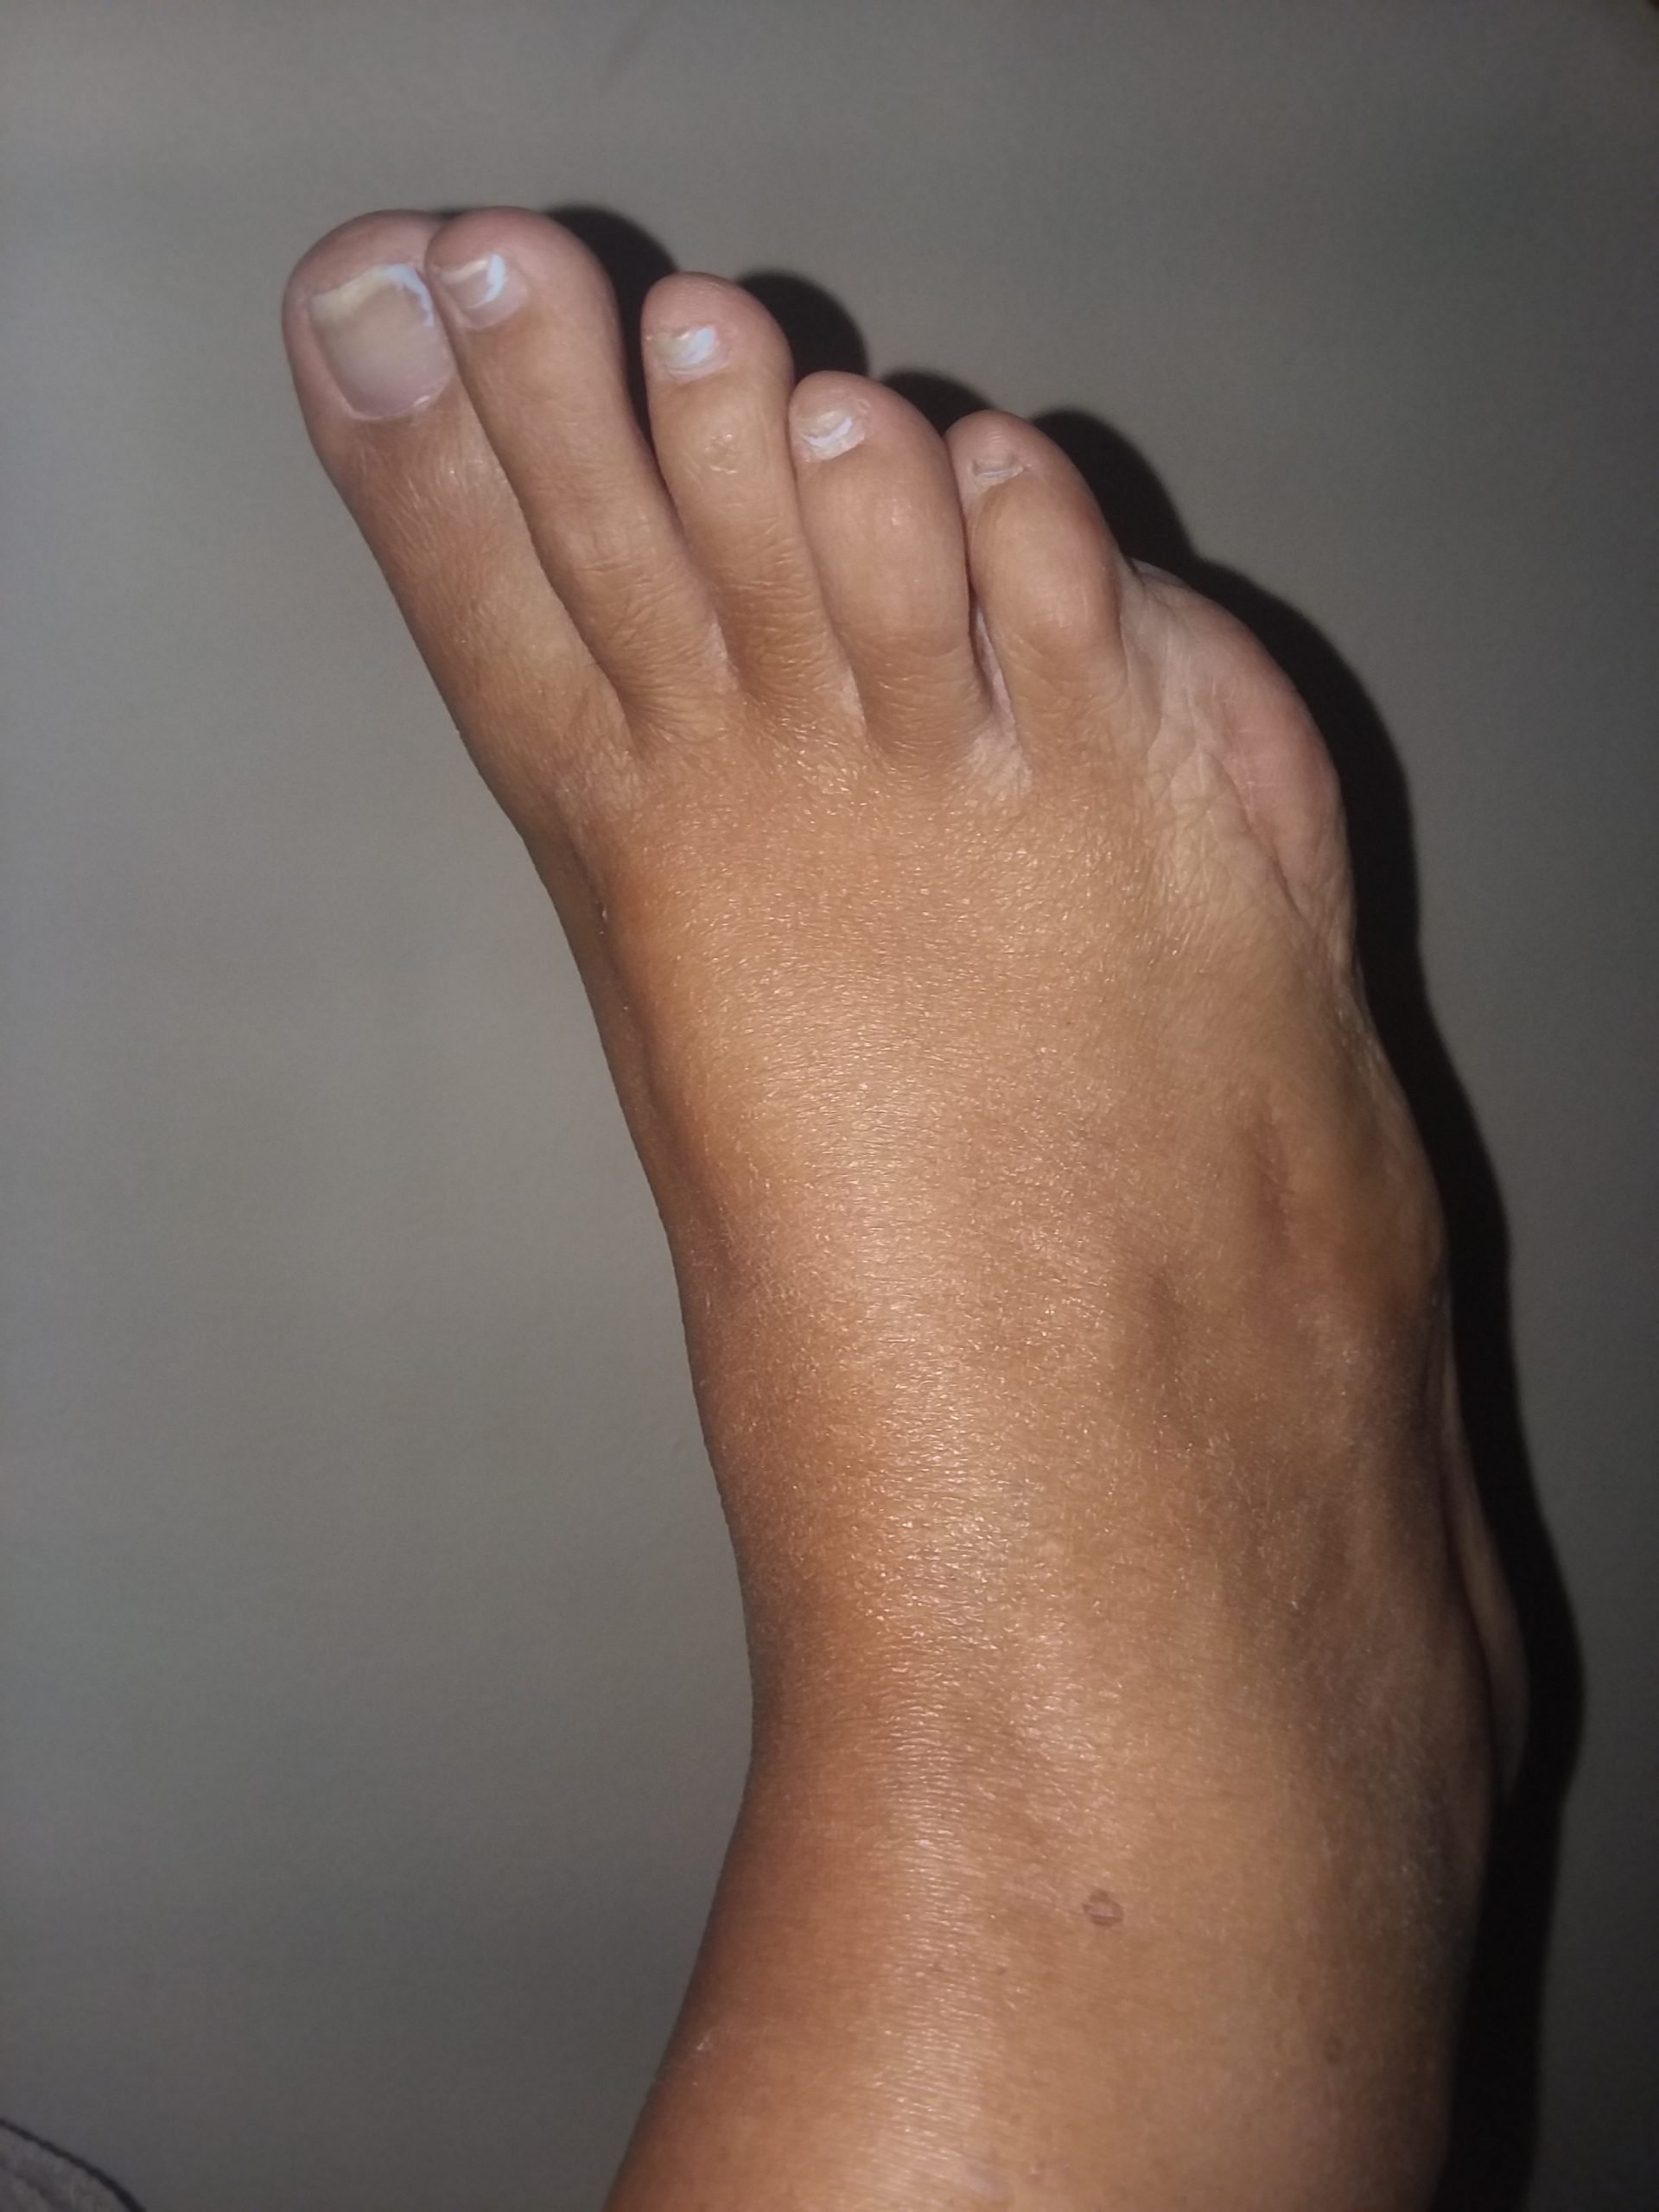 For over 10 years severe pain. Chronic gout in feet, knee ...